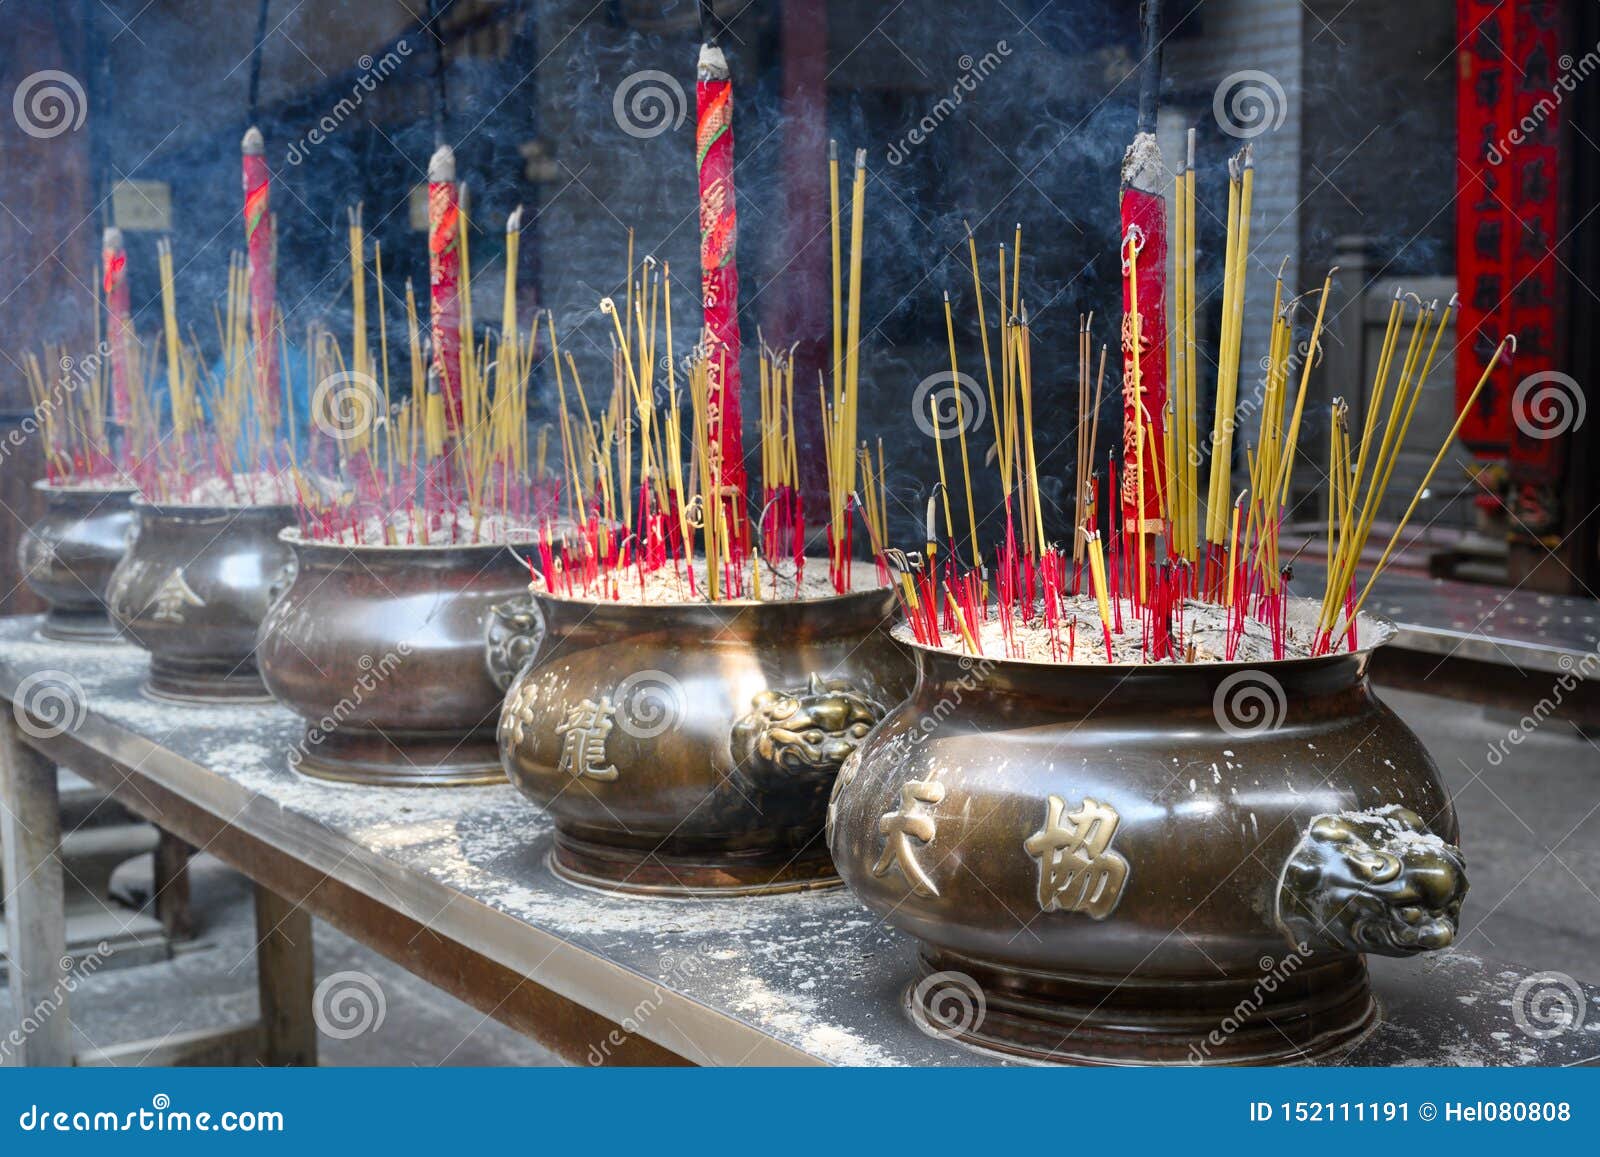 burning-incense-sticks-asian-buddhist-temple-joss-pots-traditional-ritual-religions-typical-rite-offering-temples-152111191.jpg